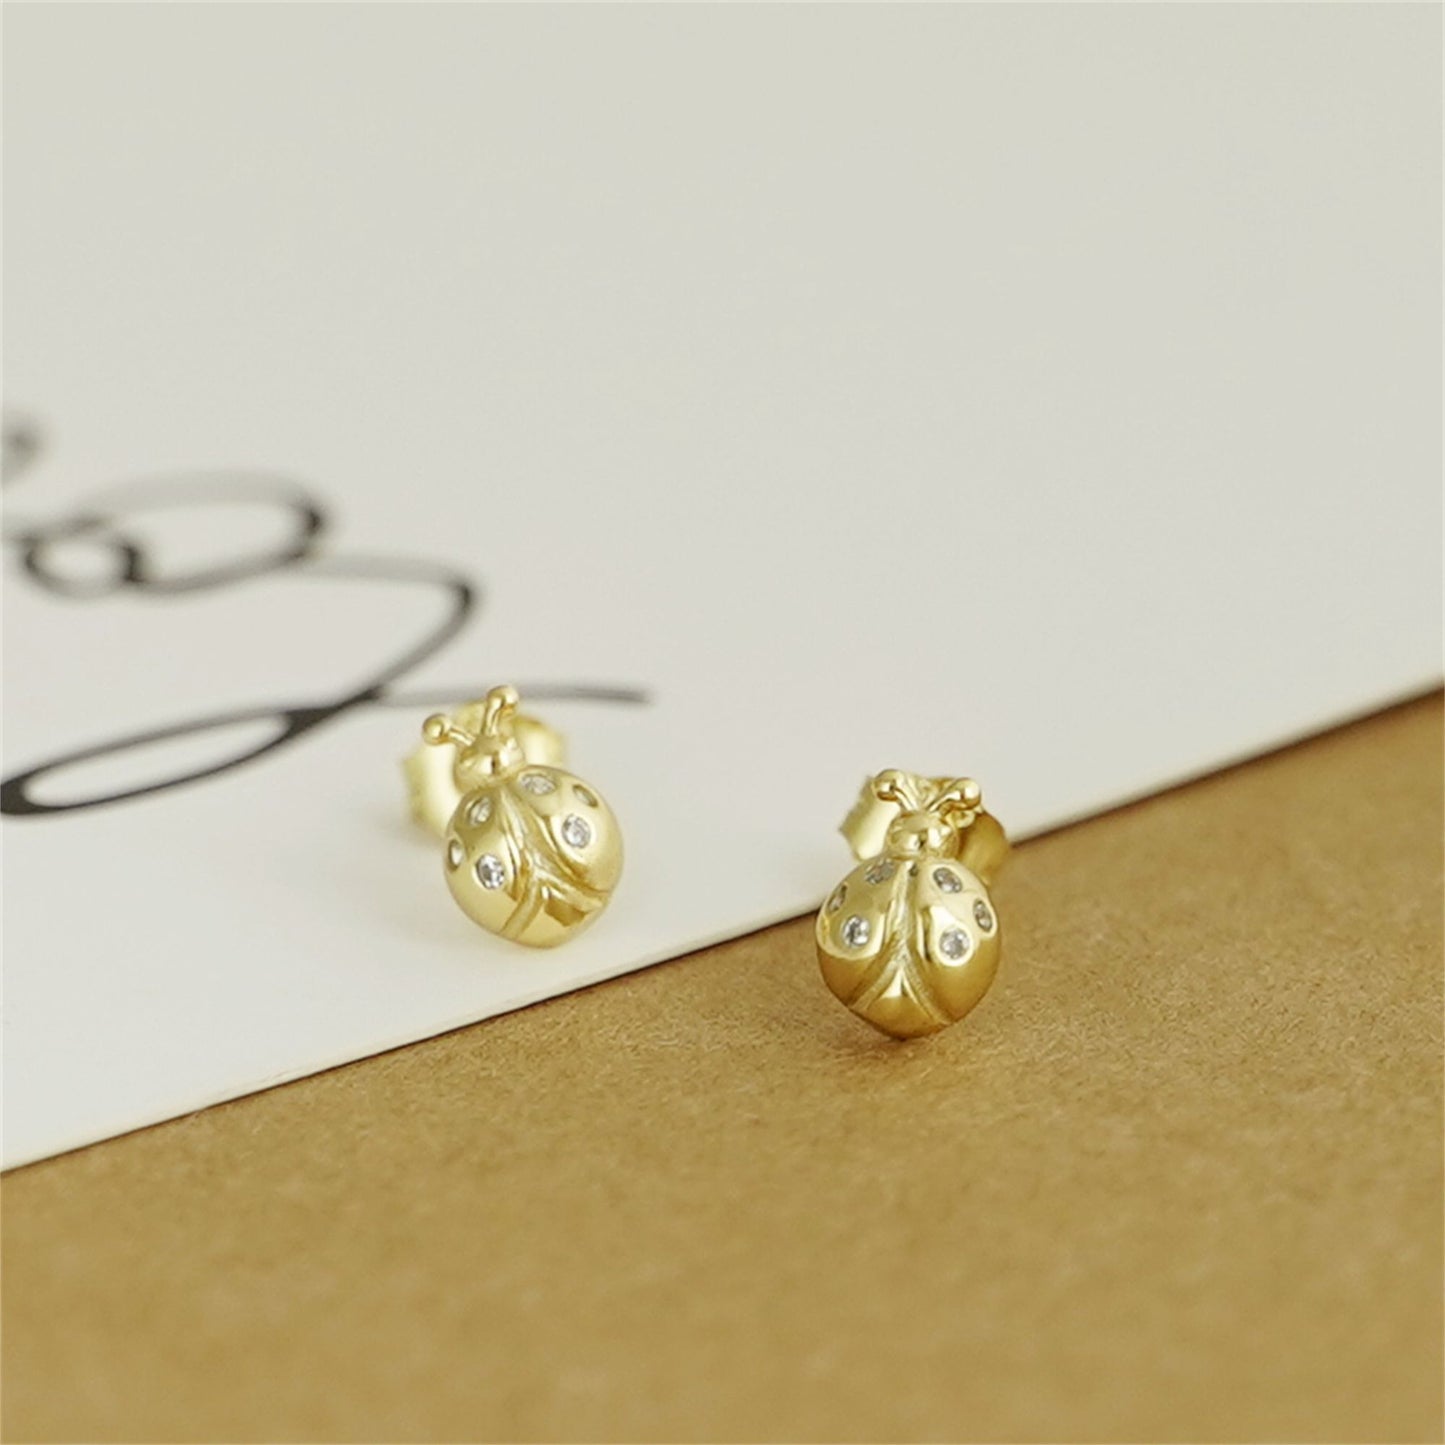 18K Gold on Sterling Silver Ladybird Stud Earrings with CZ